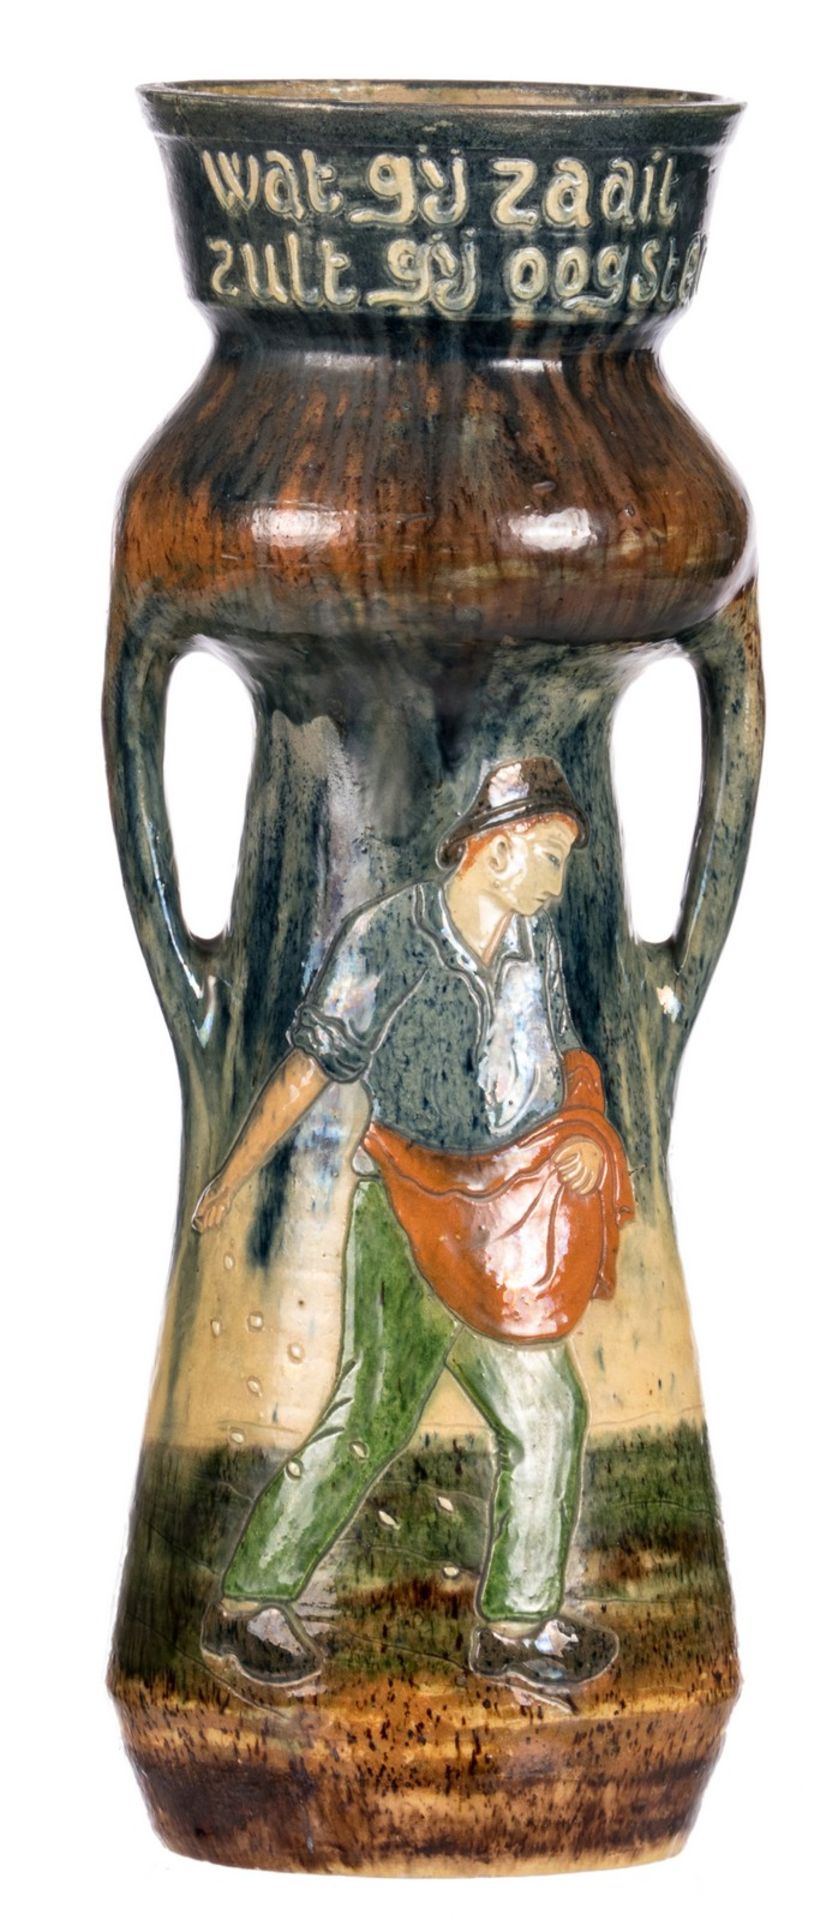 'Wat gij zaait, zult gij oogsten' (What you seed is what you get), a Thourout earthenware vase in